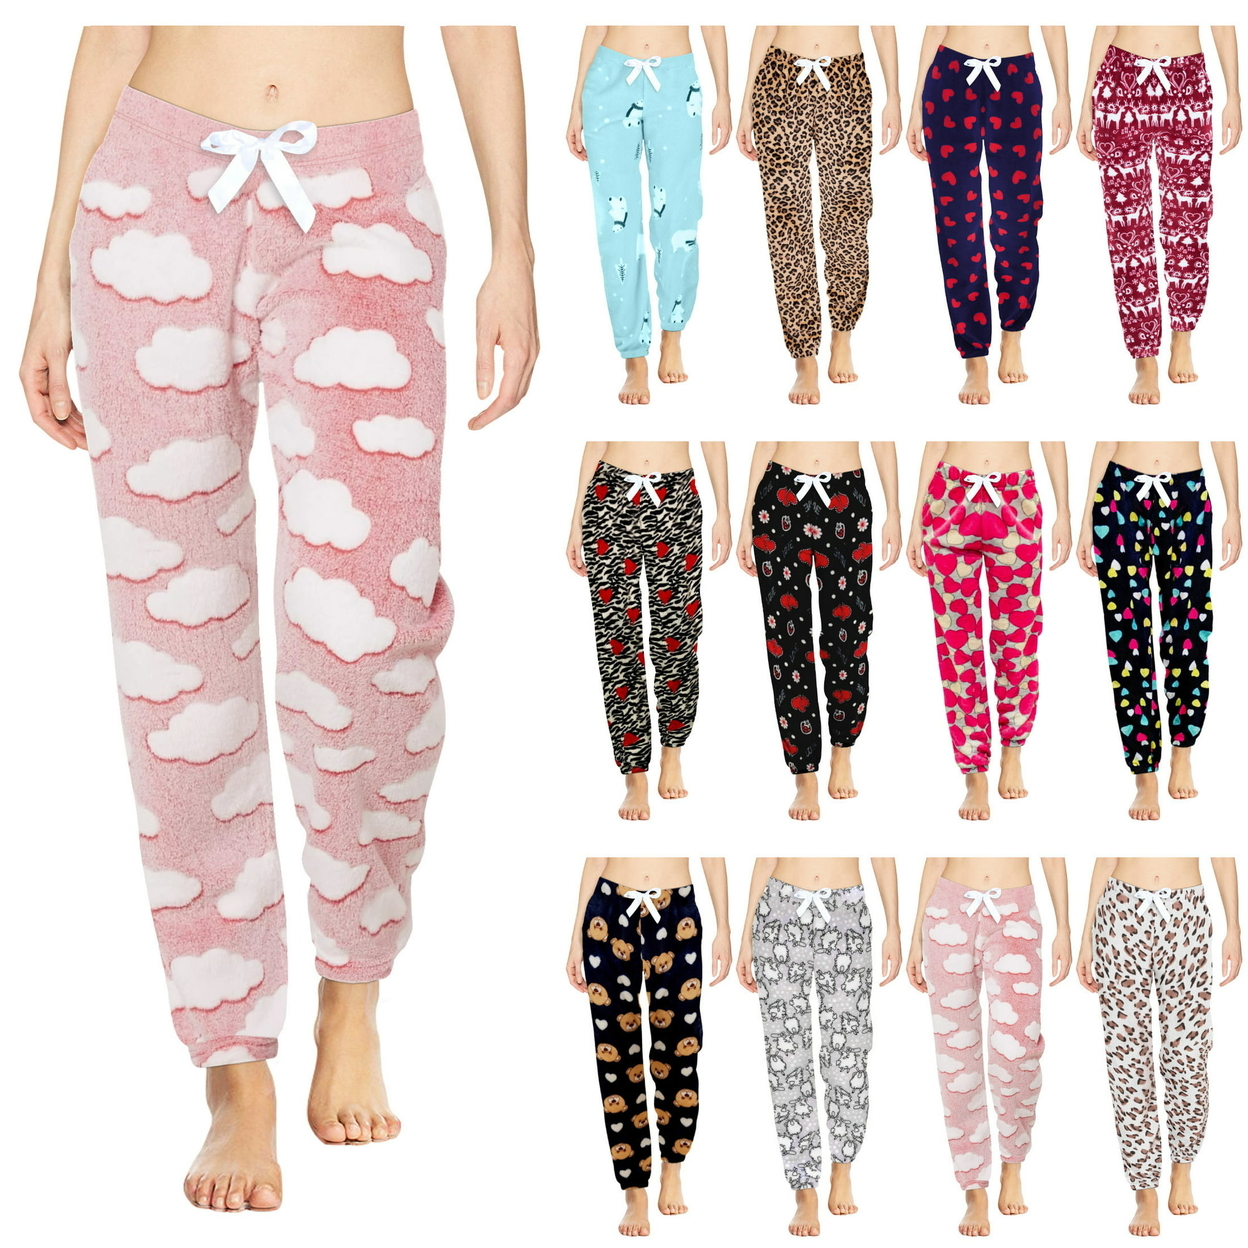 4-Pack: Women's Solid & Printed Ultra-Soft Comfy Stretch Micro-Fleece Pajama Lounge Pants - X-large, Solid